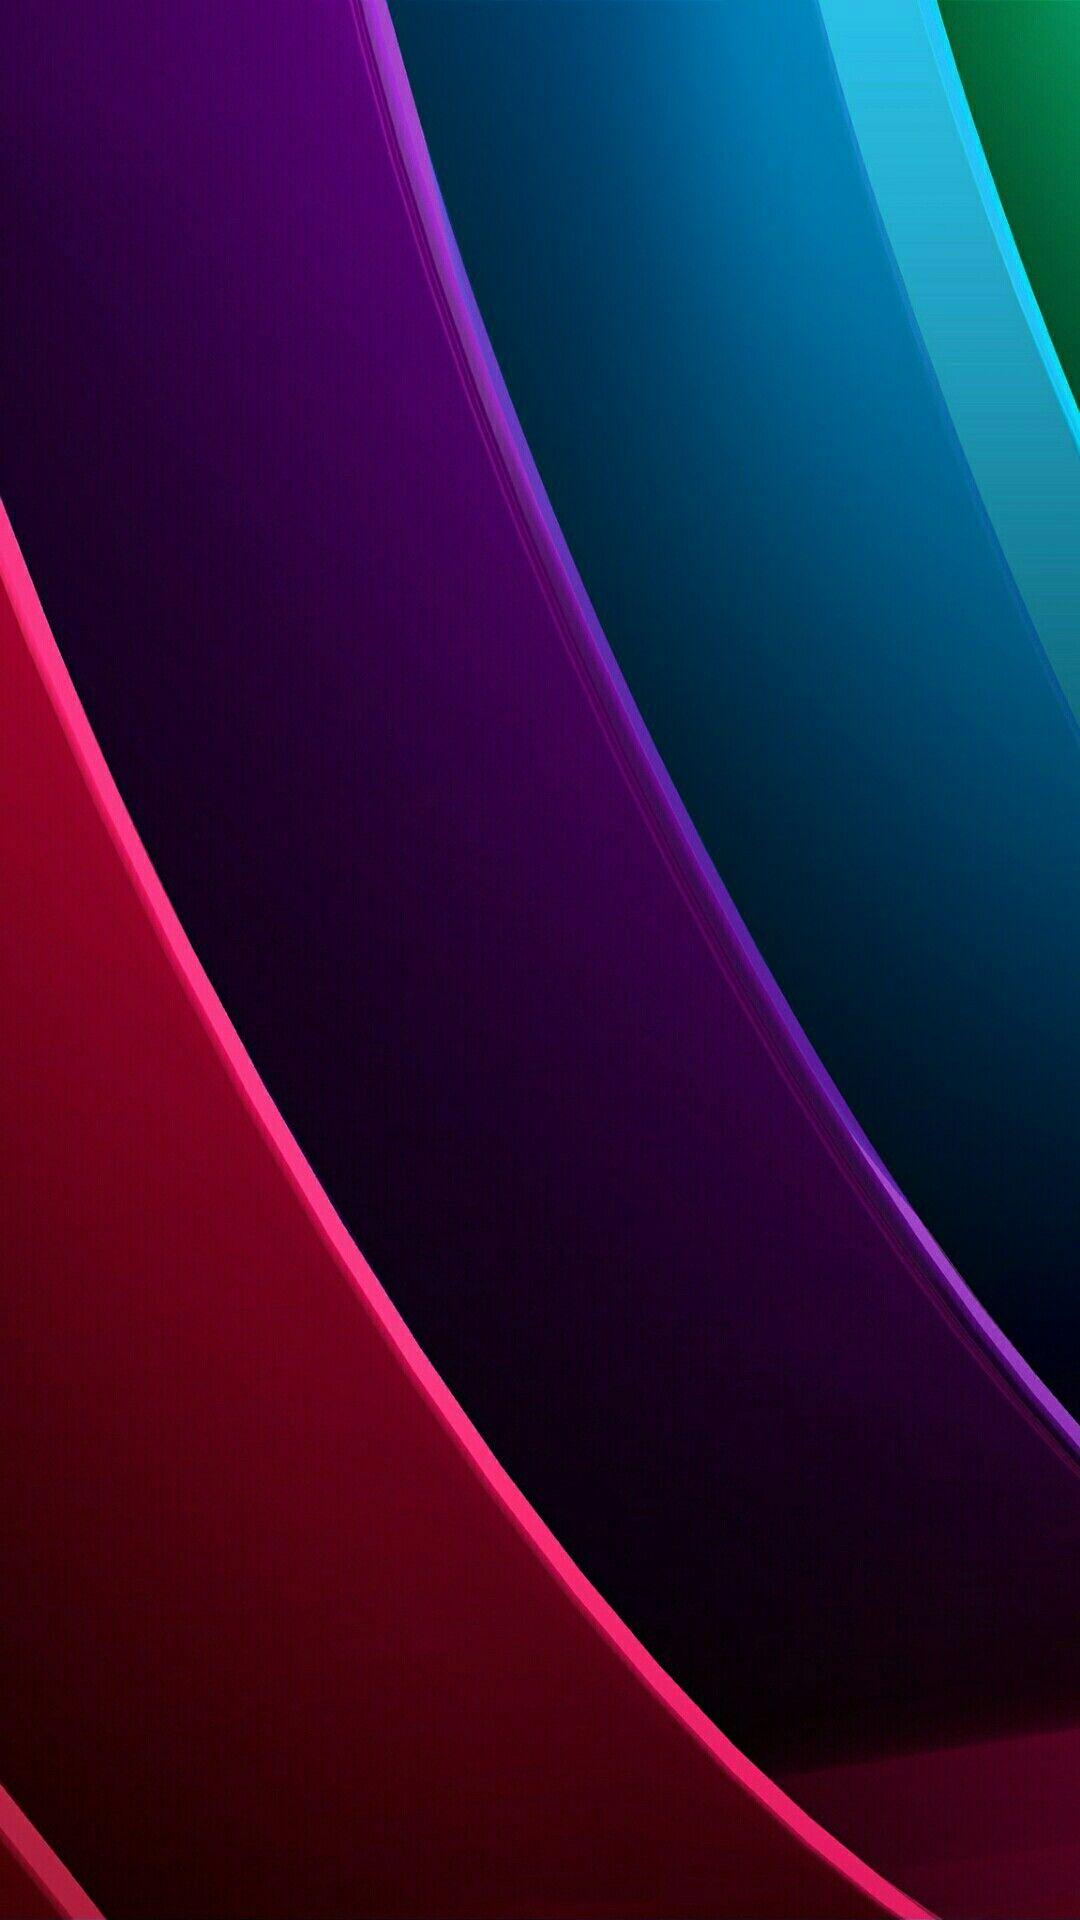 Bold Color Abstract Wallpaper. Cellphone wallpaper, Cool wallpaper, Abstract wallpaper